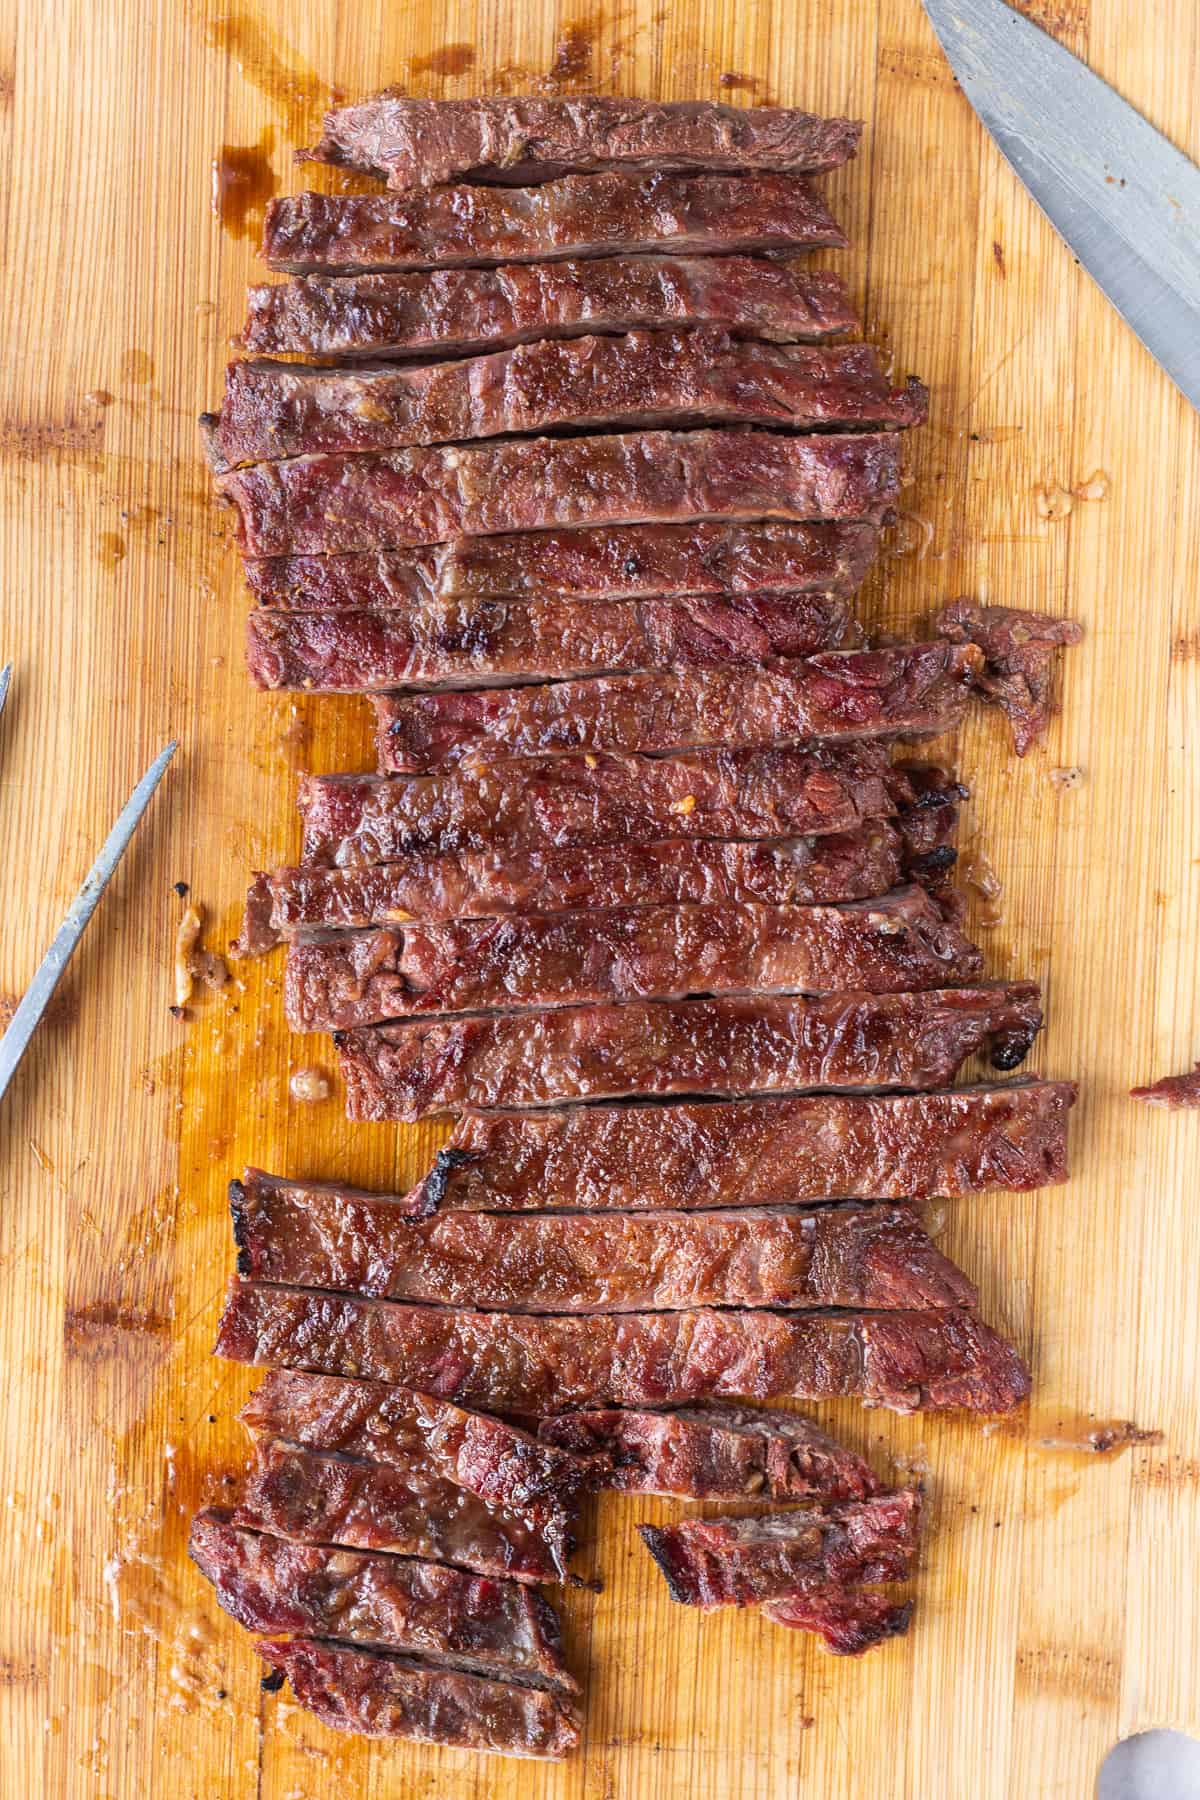 Skirt steak prepared on the Traeger on a cutting board and sliced into pieces. 